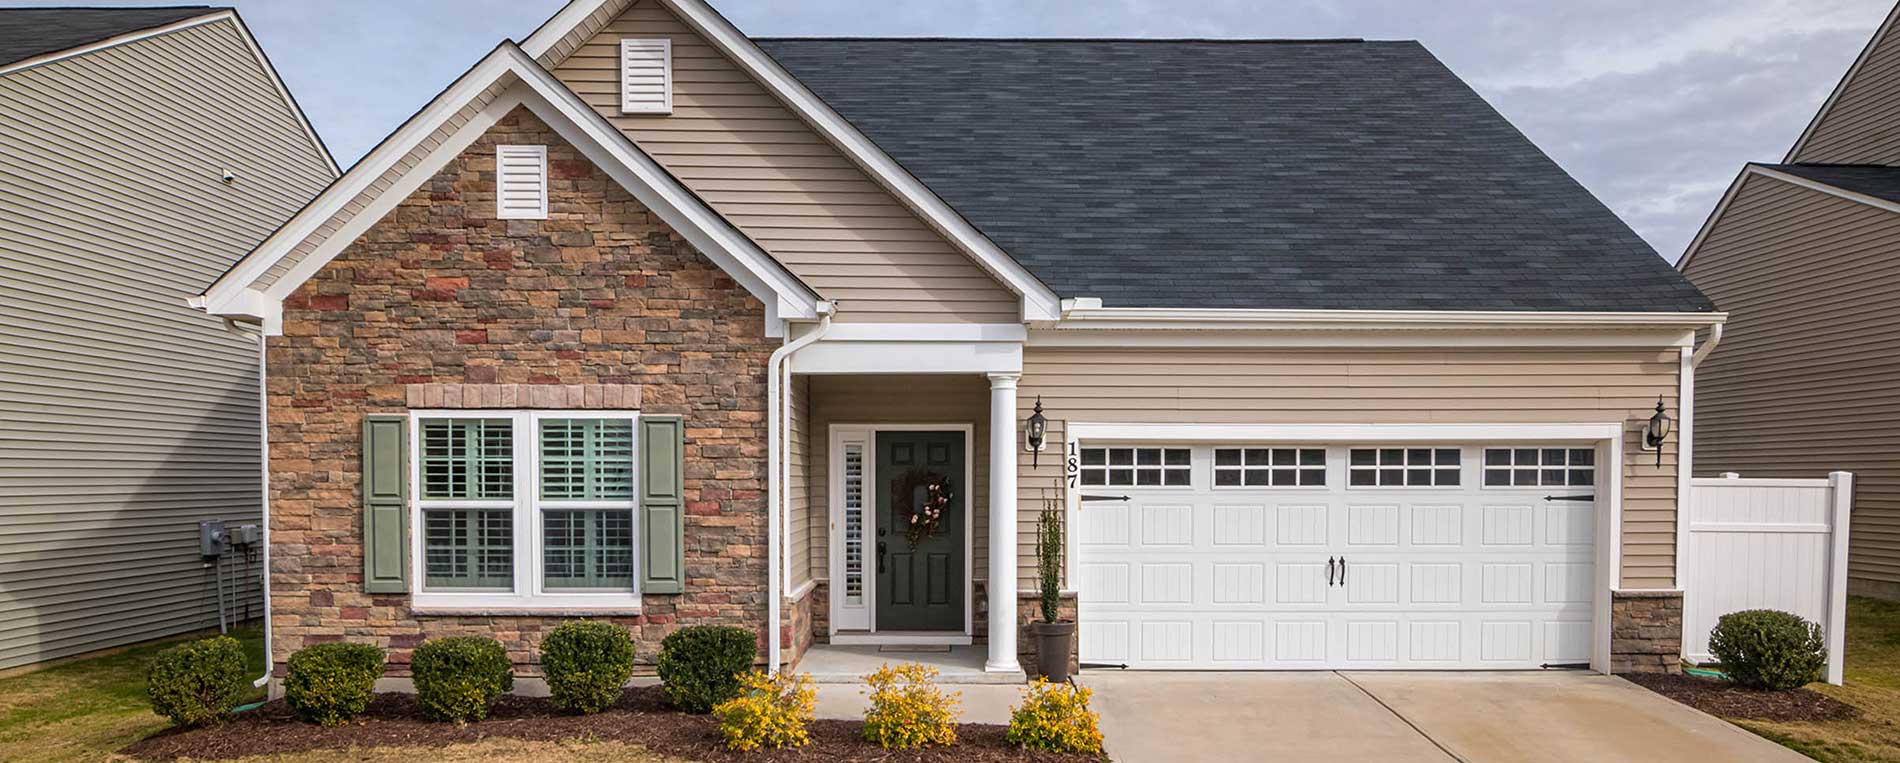 Frequently Asked Garage Door Questions